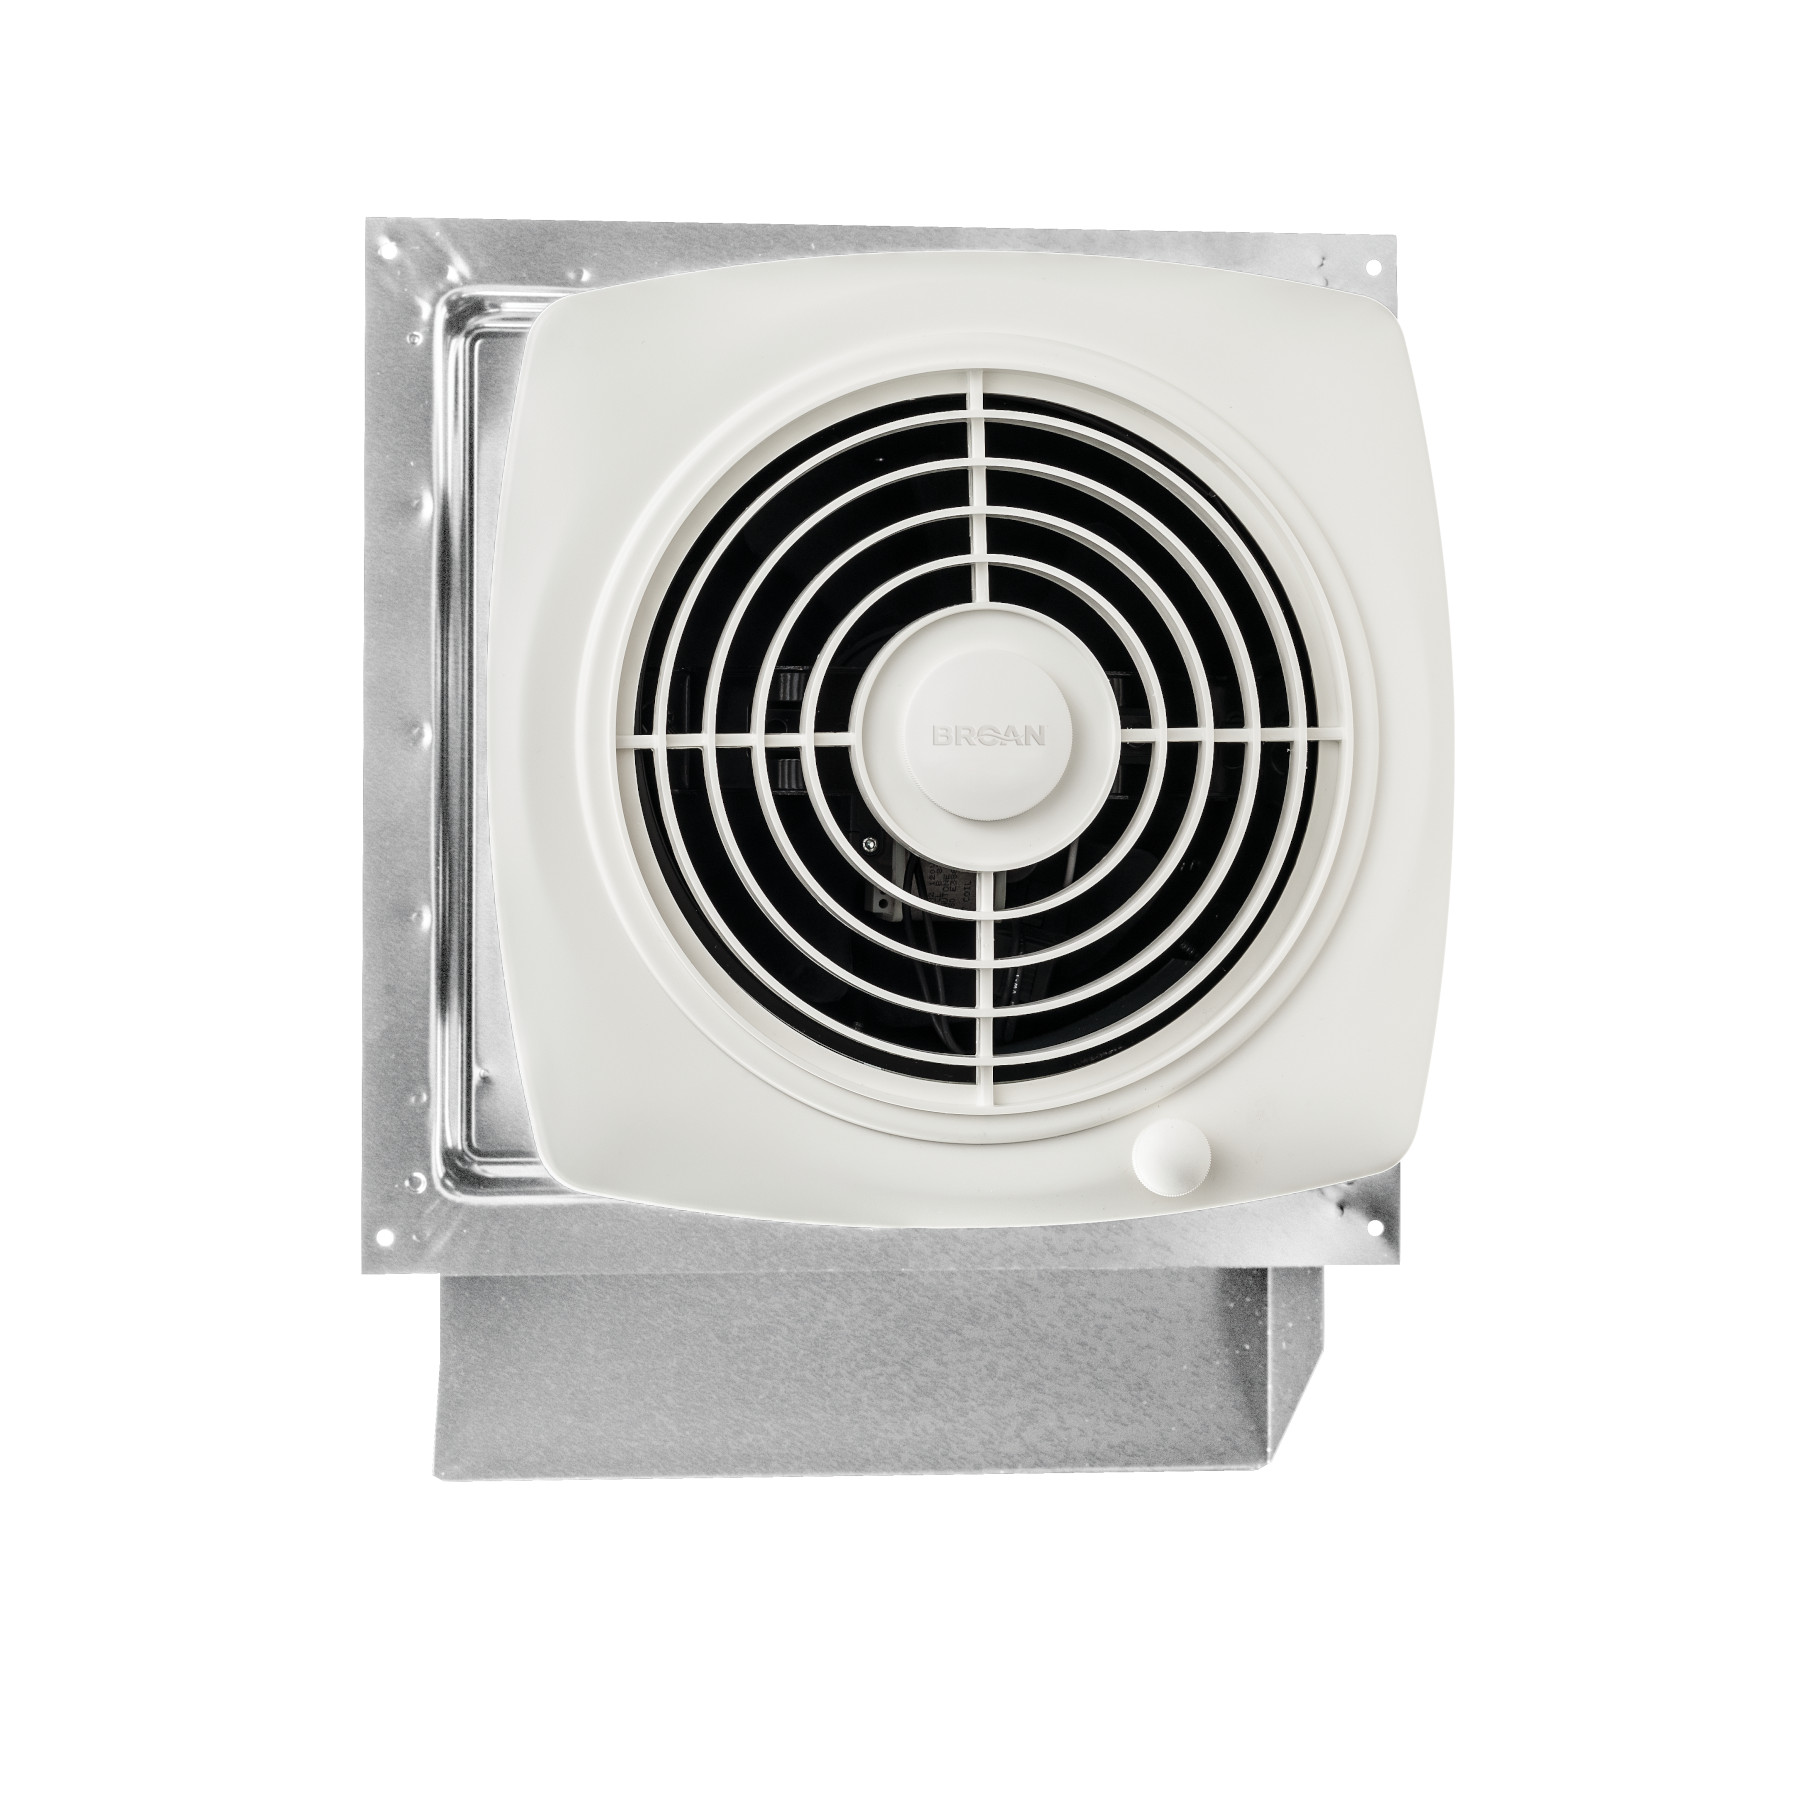 Broan® 200 CFM Through-Wall Ventilation Fan with On/Off Switch